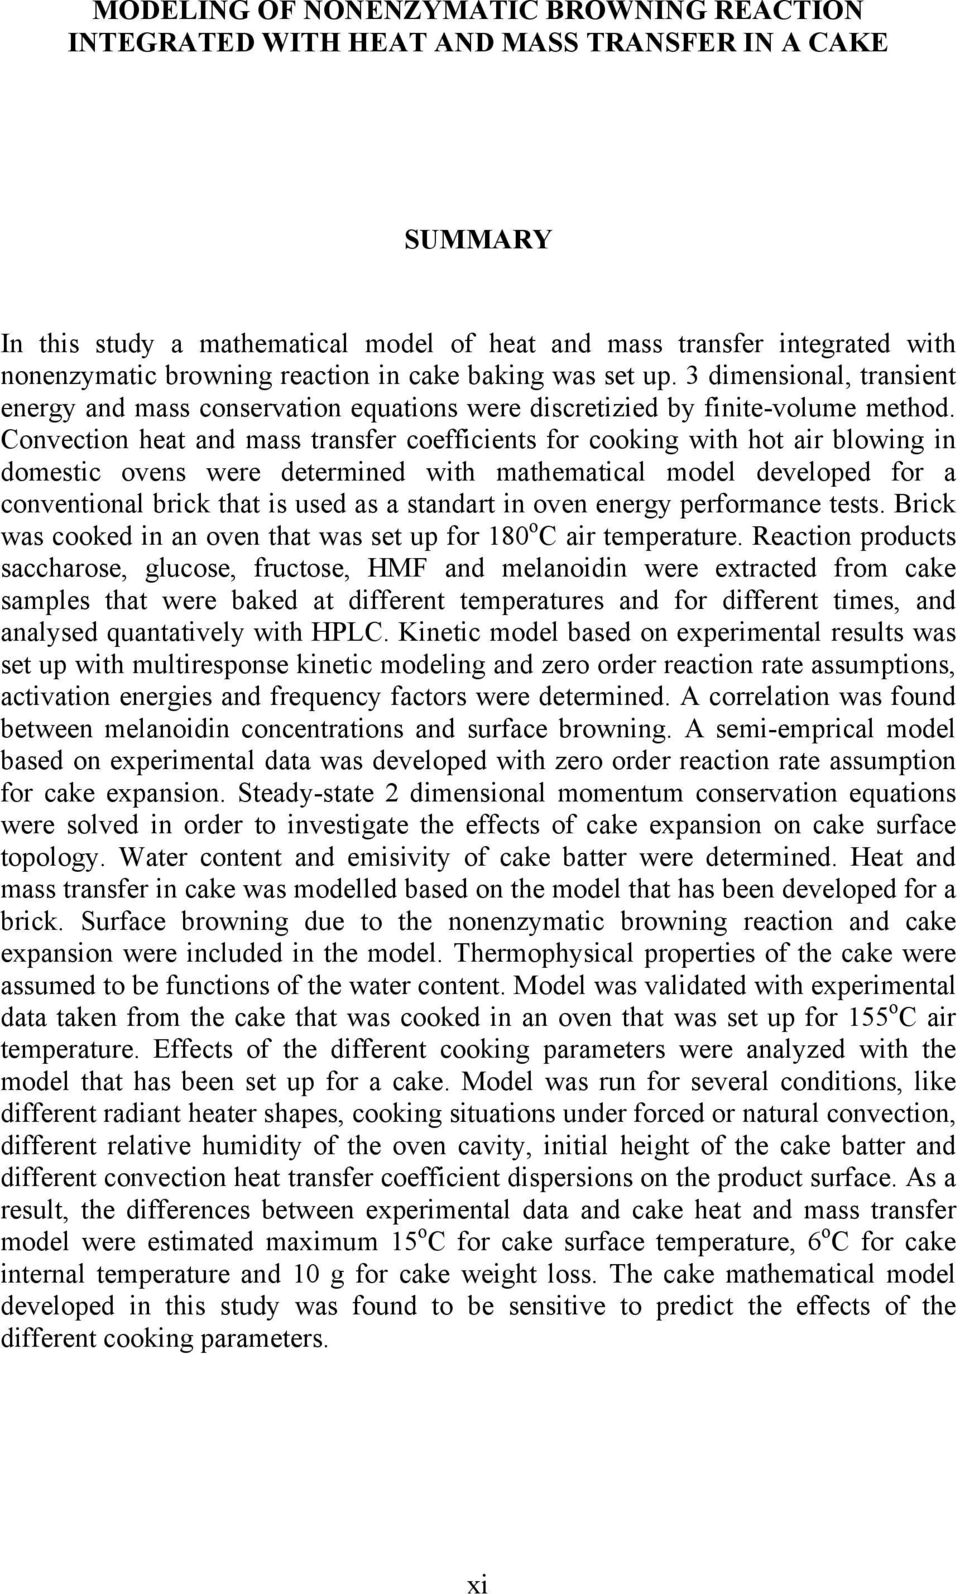 Convecton heat and mass transfer coeffcents for cookng wth hot ar blowng n domestc ovens were determned wth mathematcal model developed for a conventonal brck that s used as a standart n oven energy